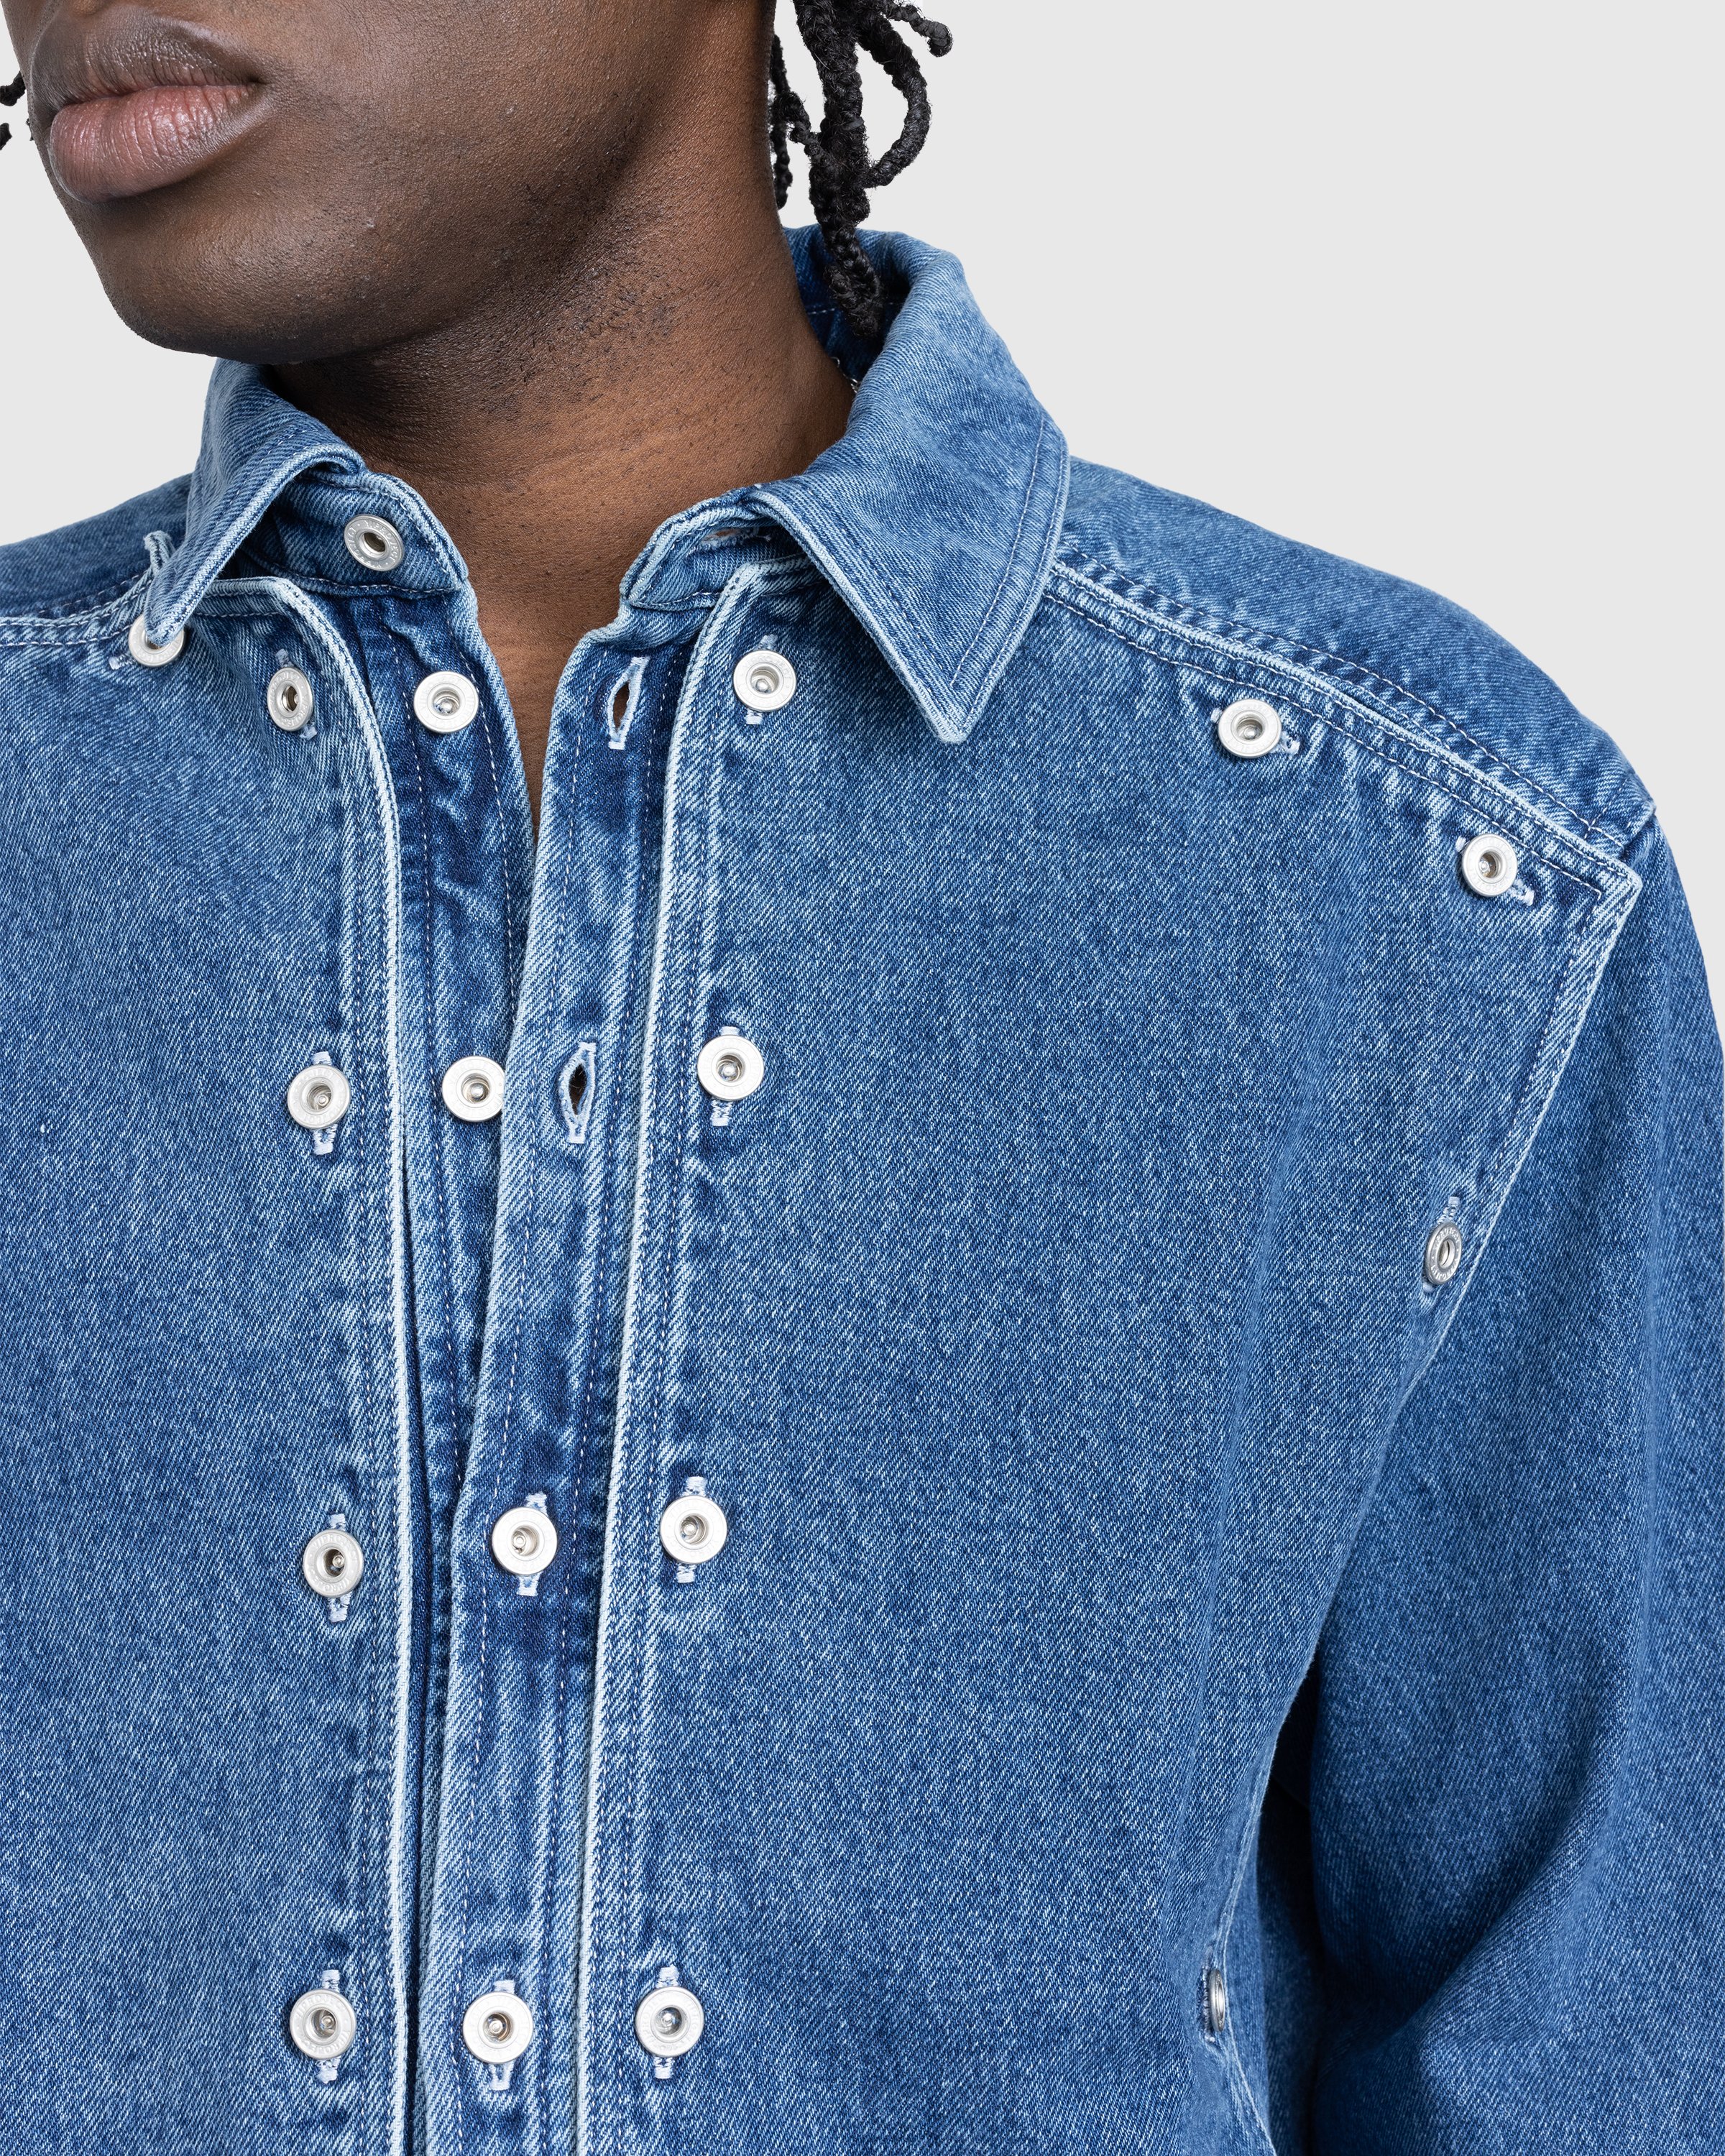 Y/Project - Classic Button Panel Denim Shirt Navy - Clothing - Blue - Image 4